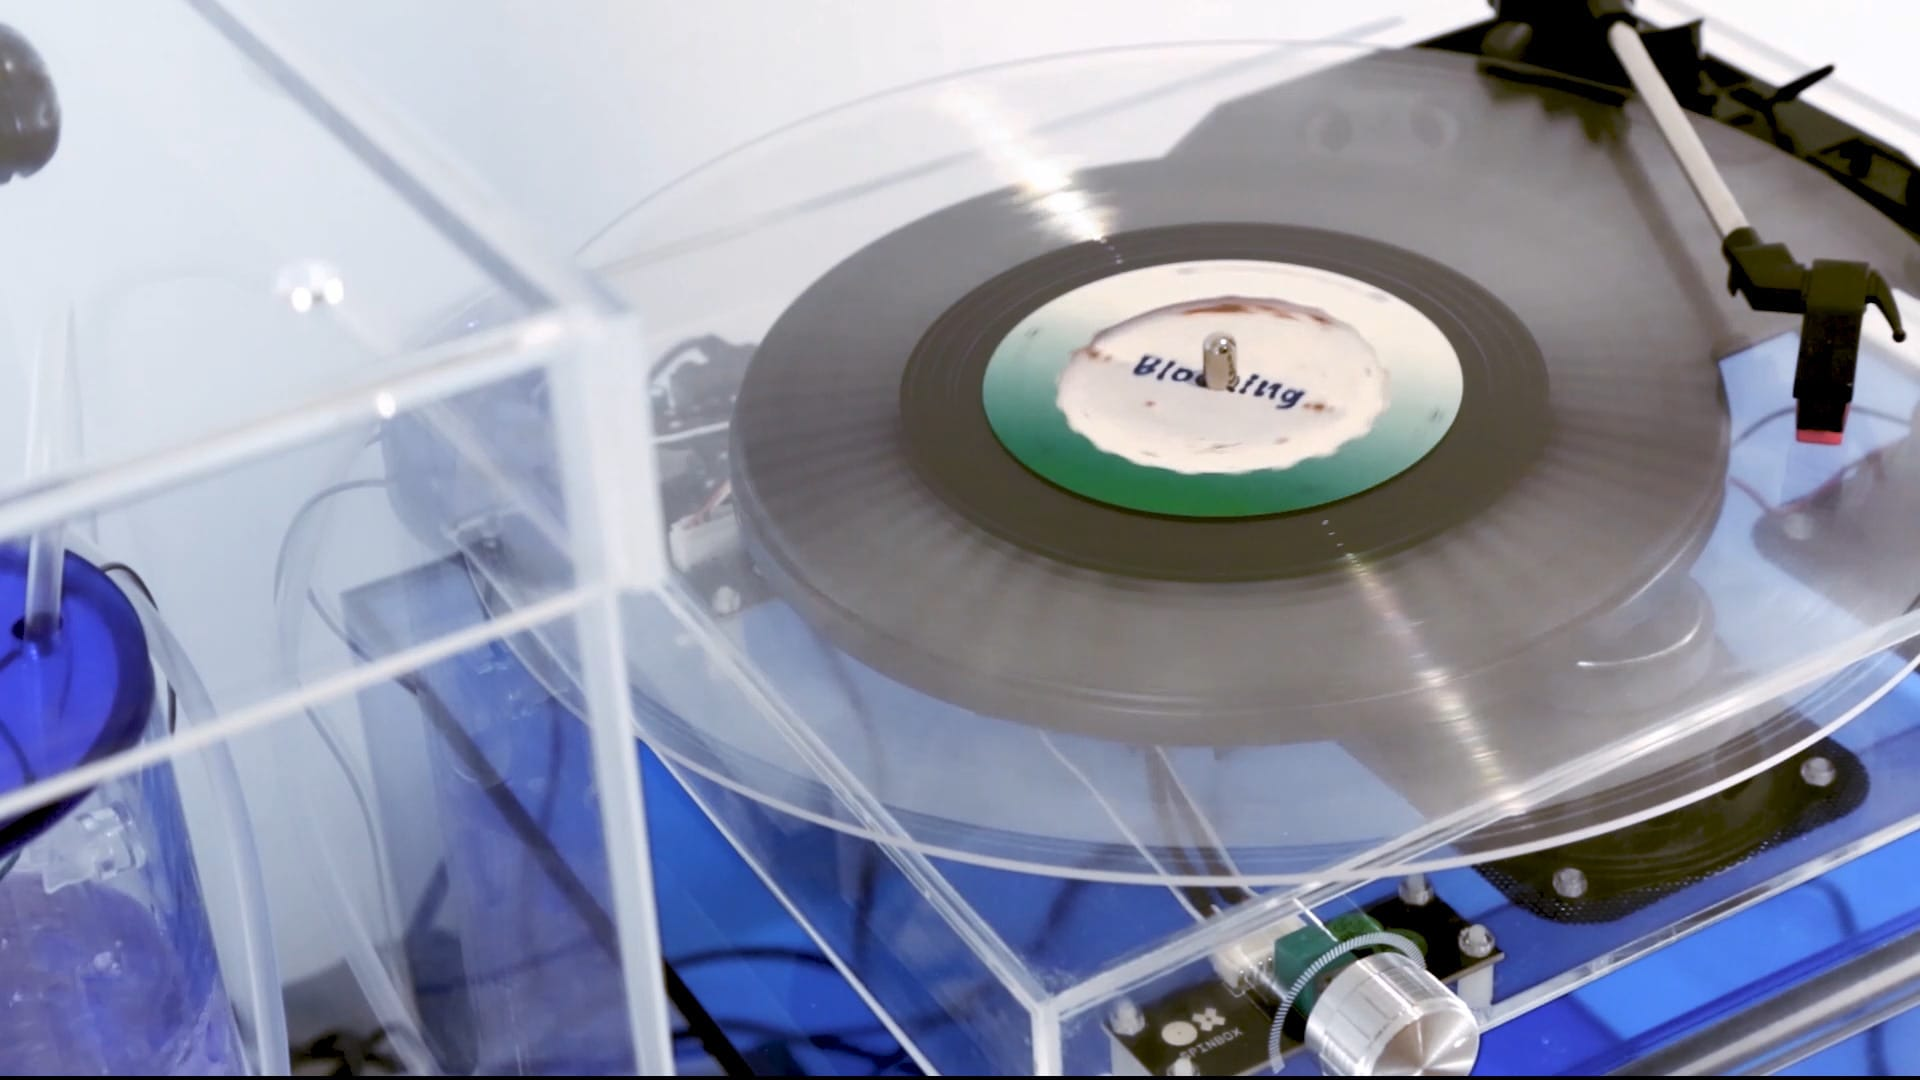 Photograph, taken from above and to the side, of a record player, with a body made from a clear transparent material, playing a transparent record.